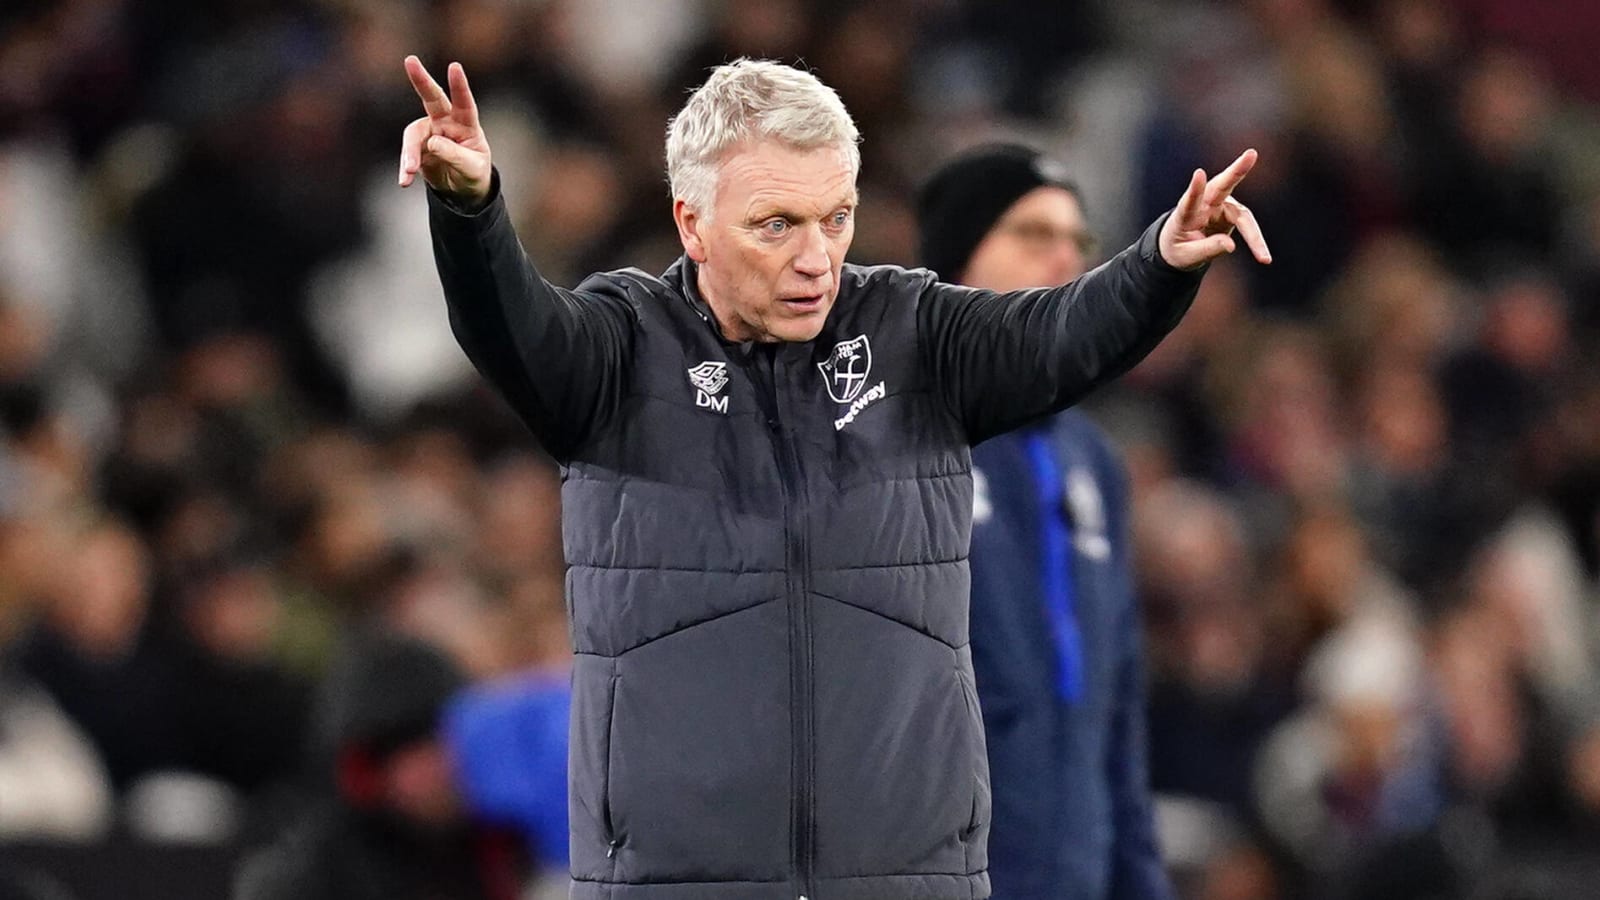 David Moyes’ unusual act after the final whistle noticed by Sky Sports